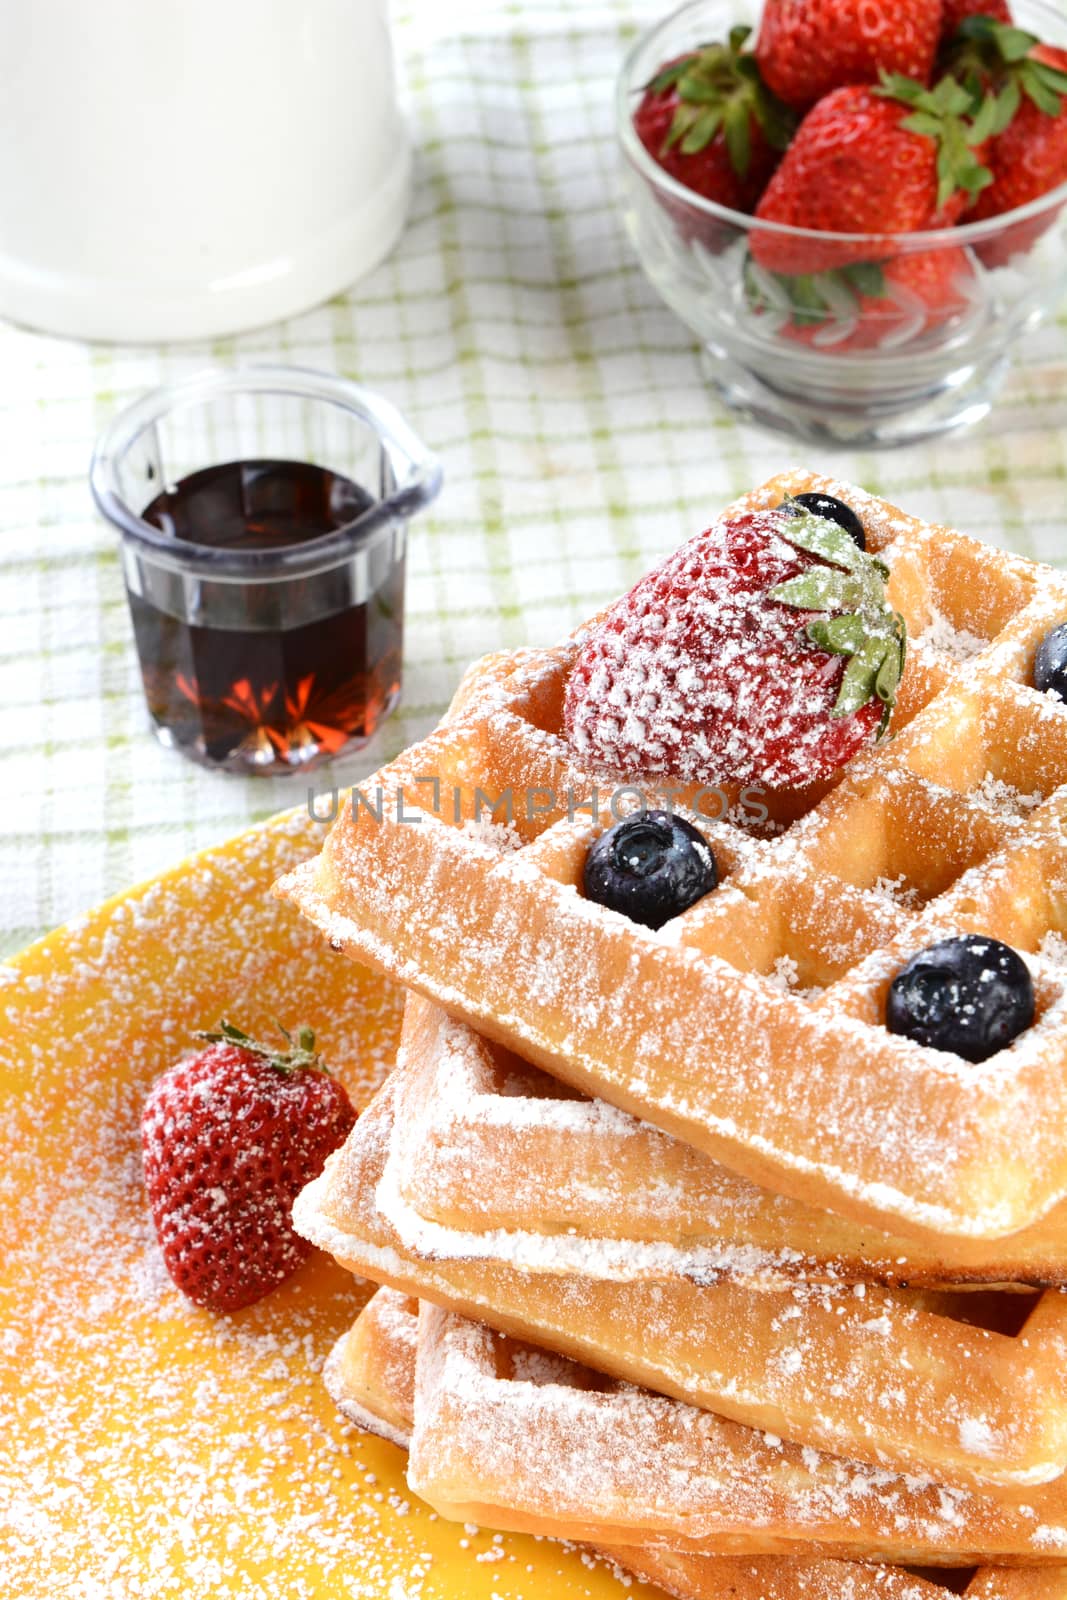 Waffles with strawberries and blueberries covered with powdered sugar. Vertical format with syrup and a bowl of fresh strawberries and a crock.